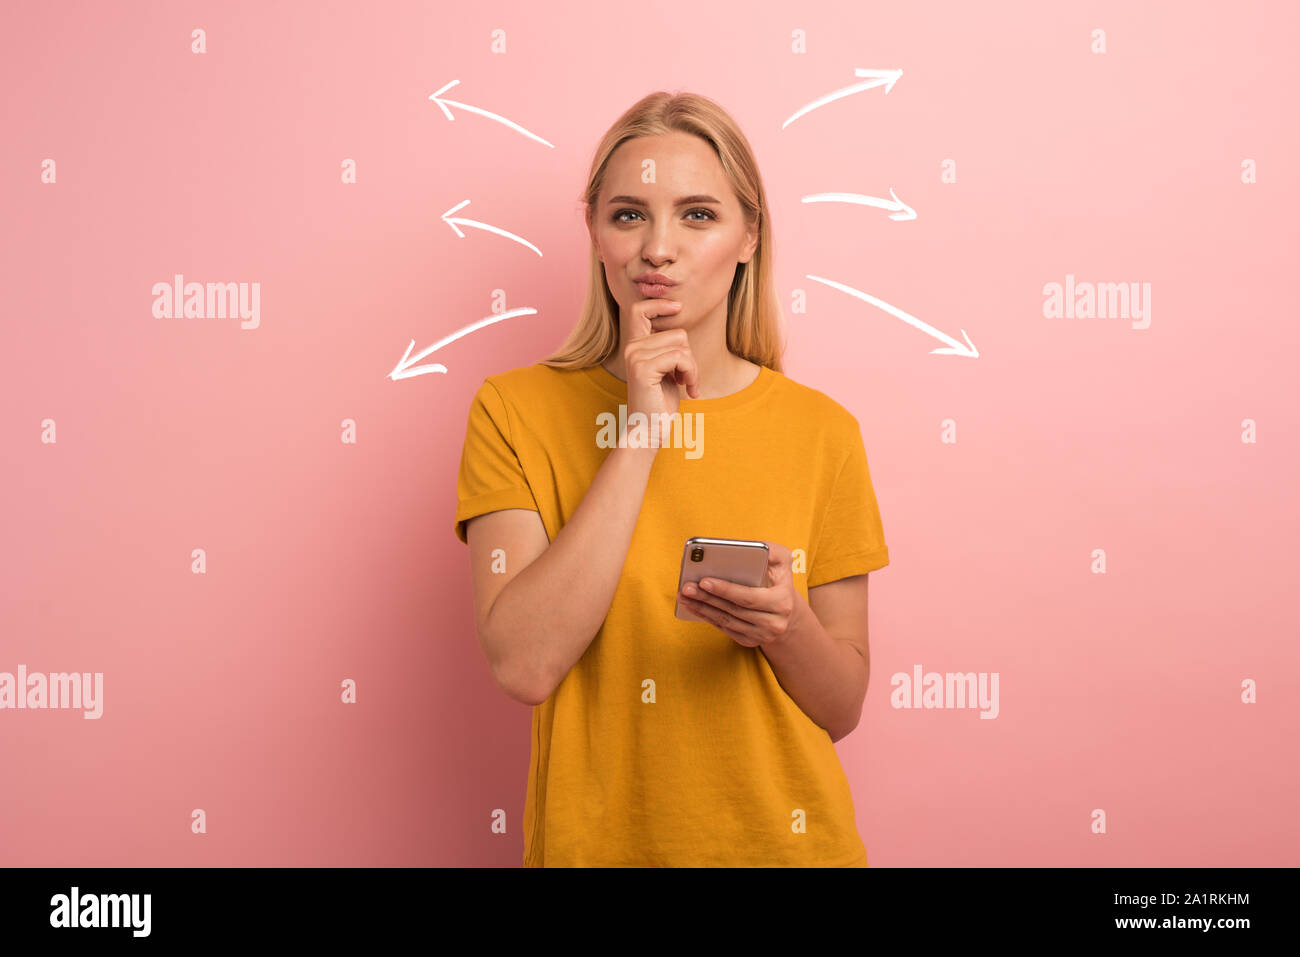 Blonde girl thinks about the right option. Confused and pensive expression. Pink background Stock Photo